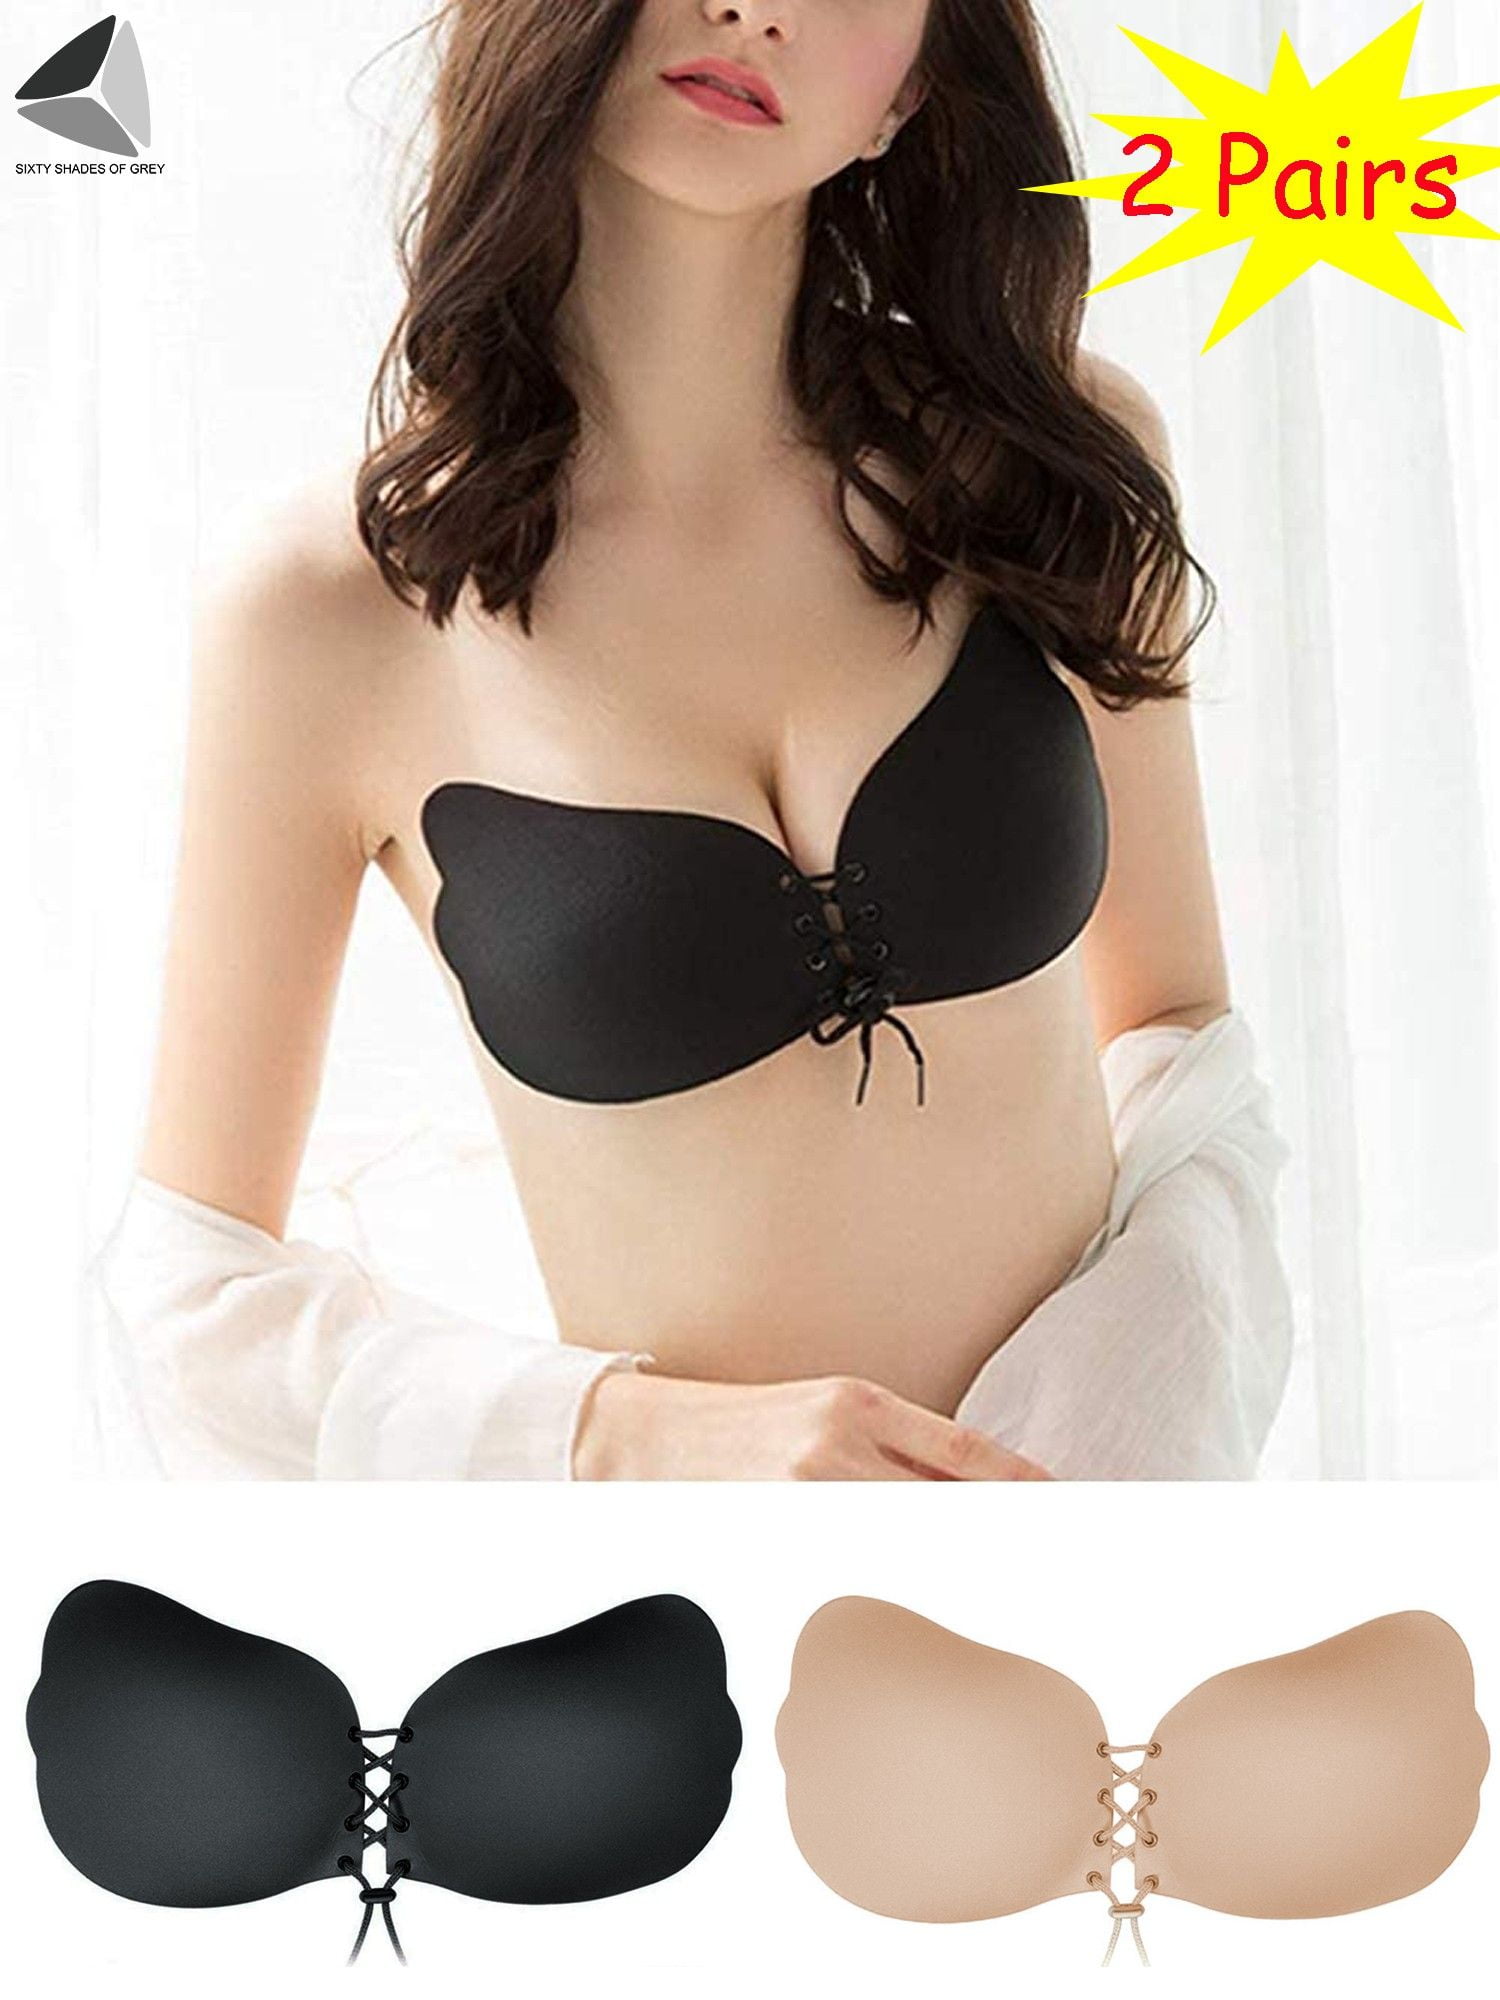 PULLIMORE 2 Pairs Women Adhesive Invisible Strapless Bra Reusable Push-up  Silicone Sticky Bra (Cup C/D, Black + Skin)